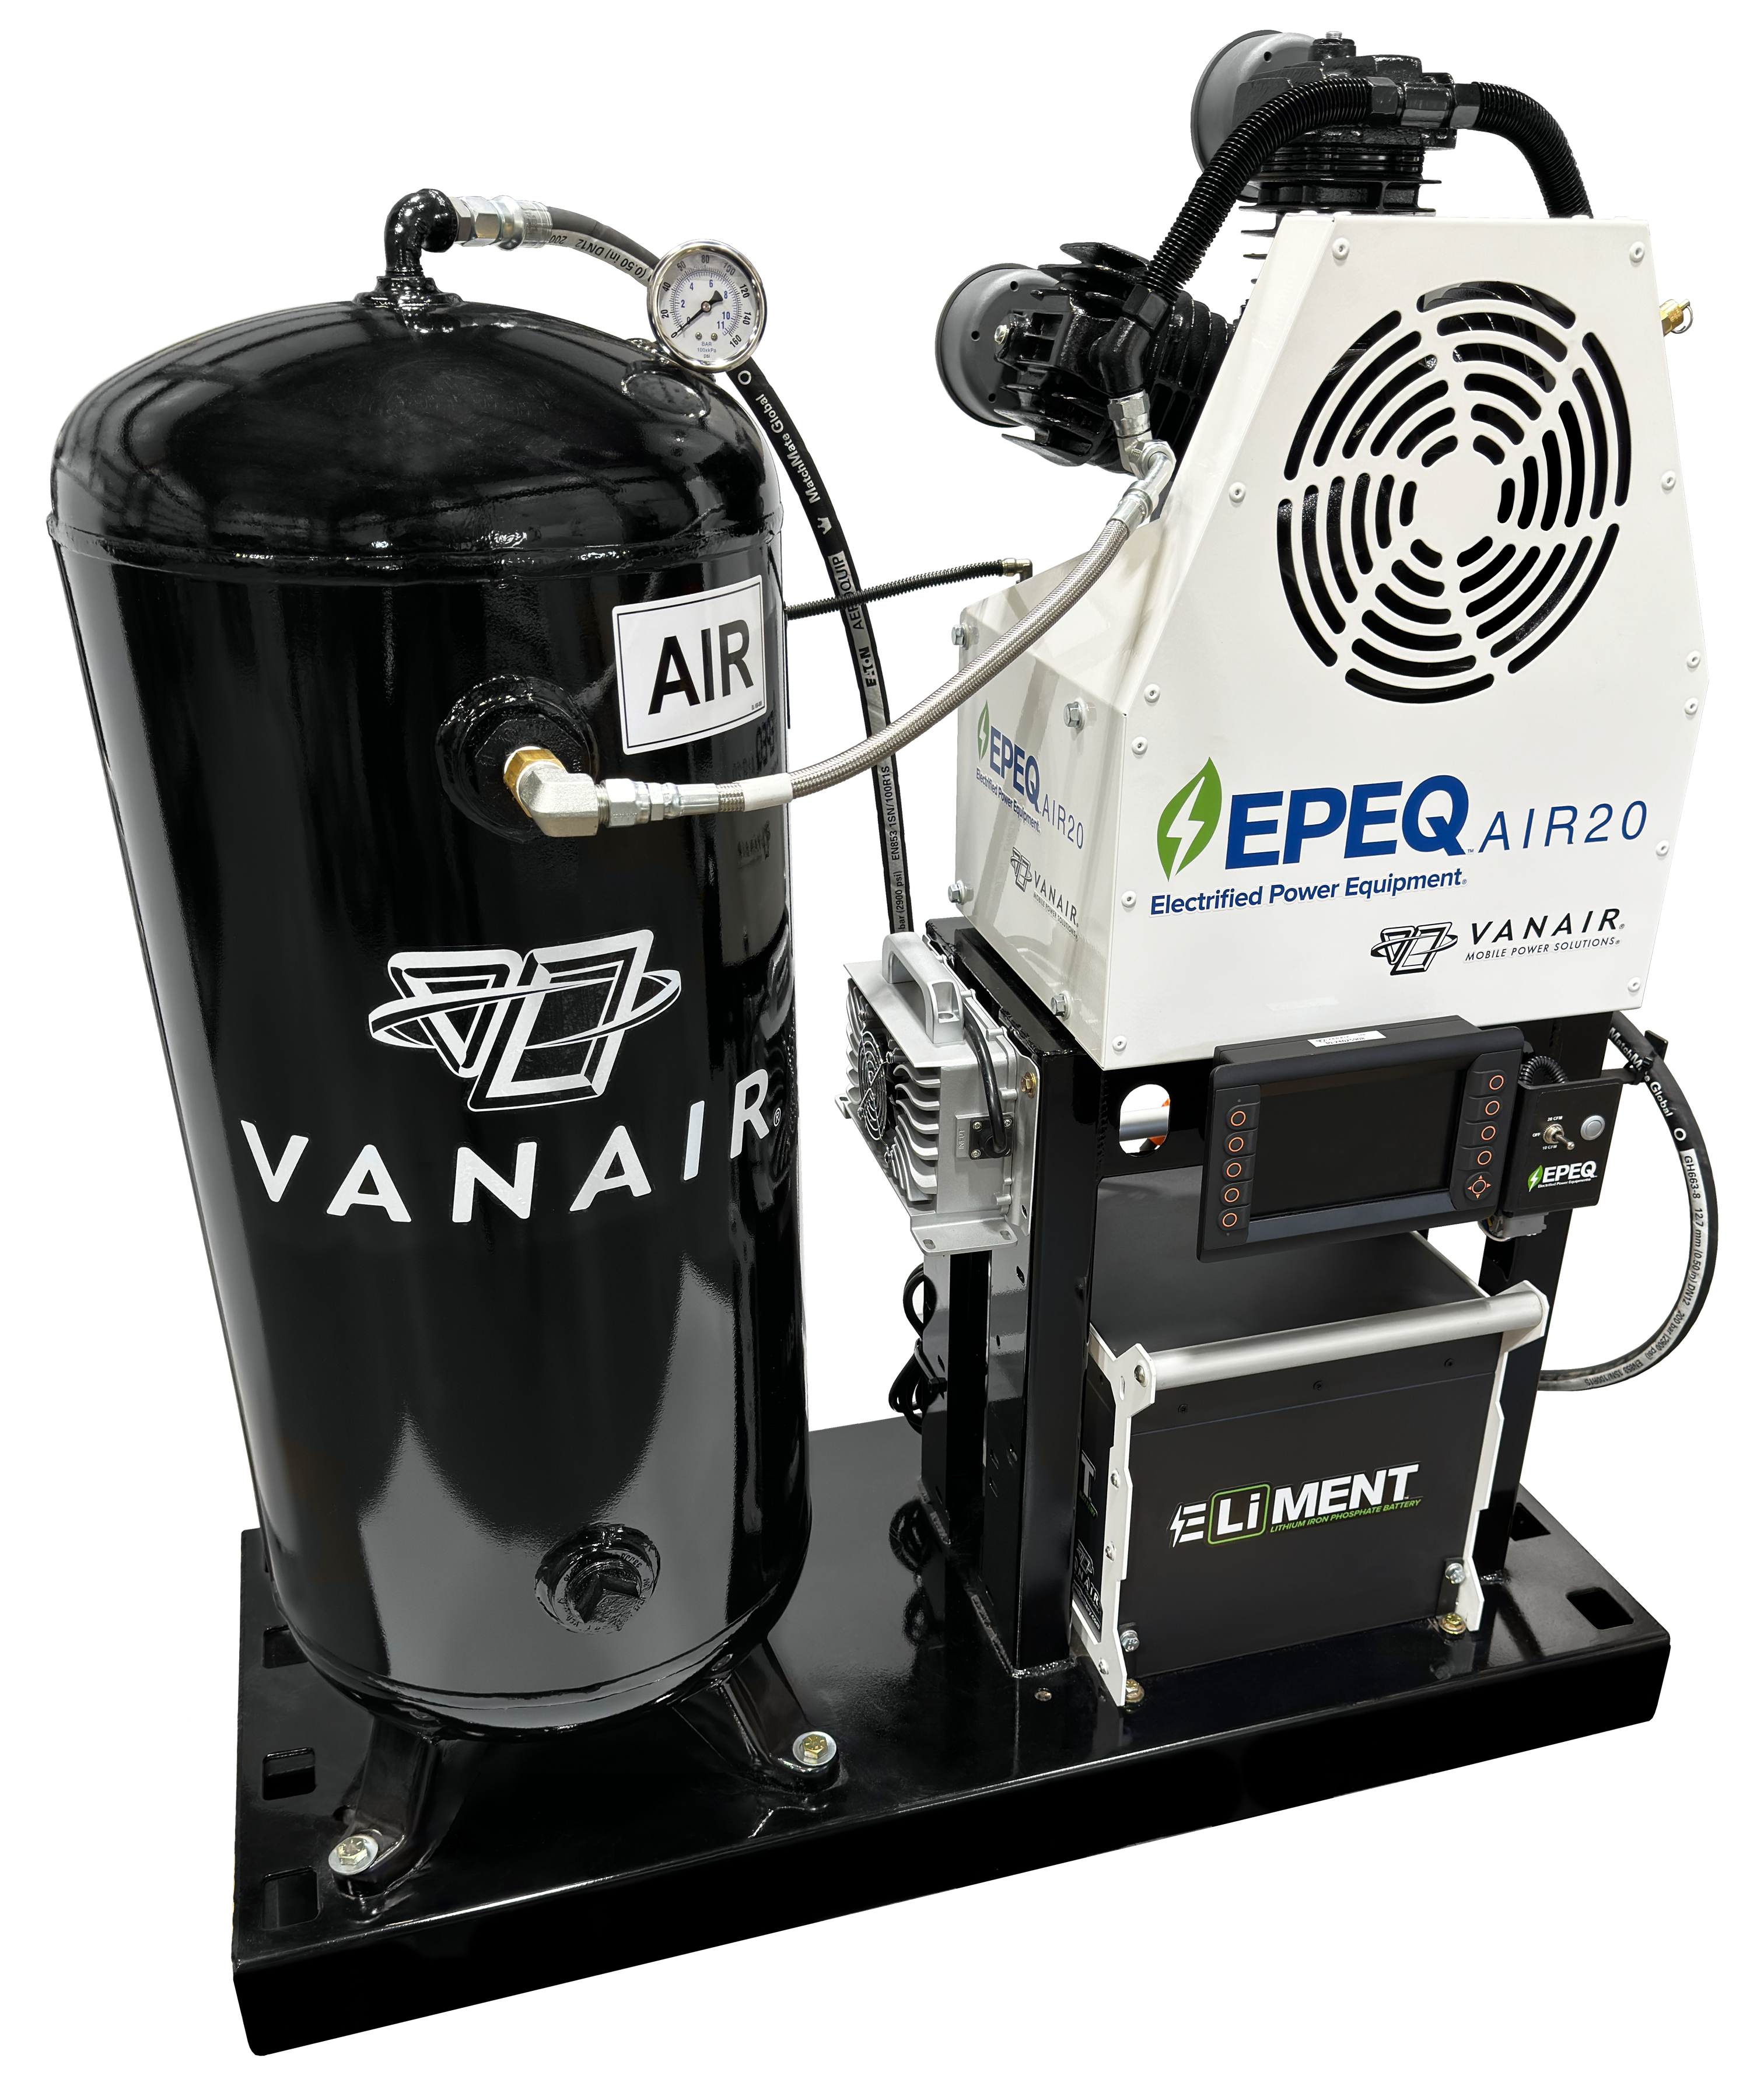 The EPEQ® EPRO20 Electrified Power Skid: Your Path to Electrification 50